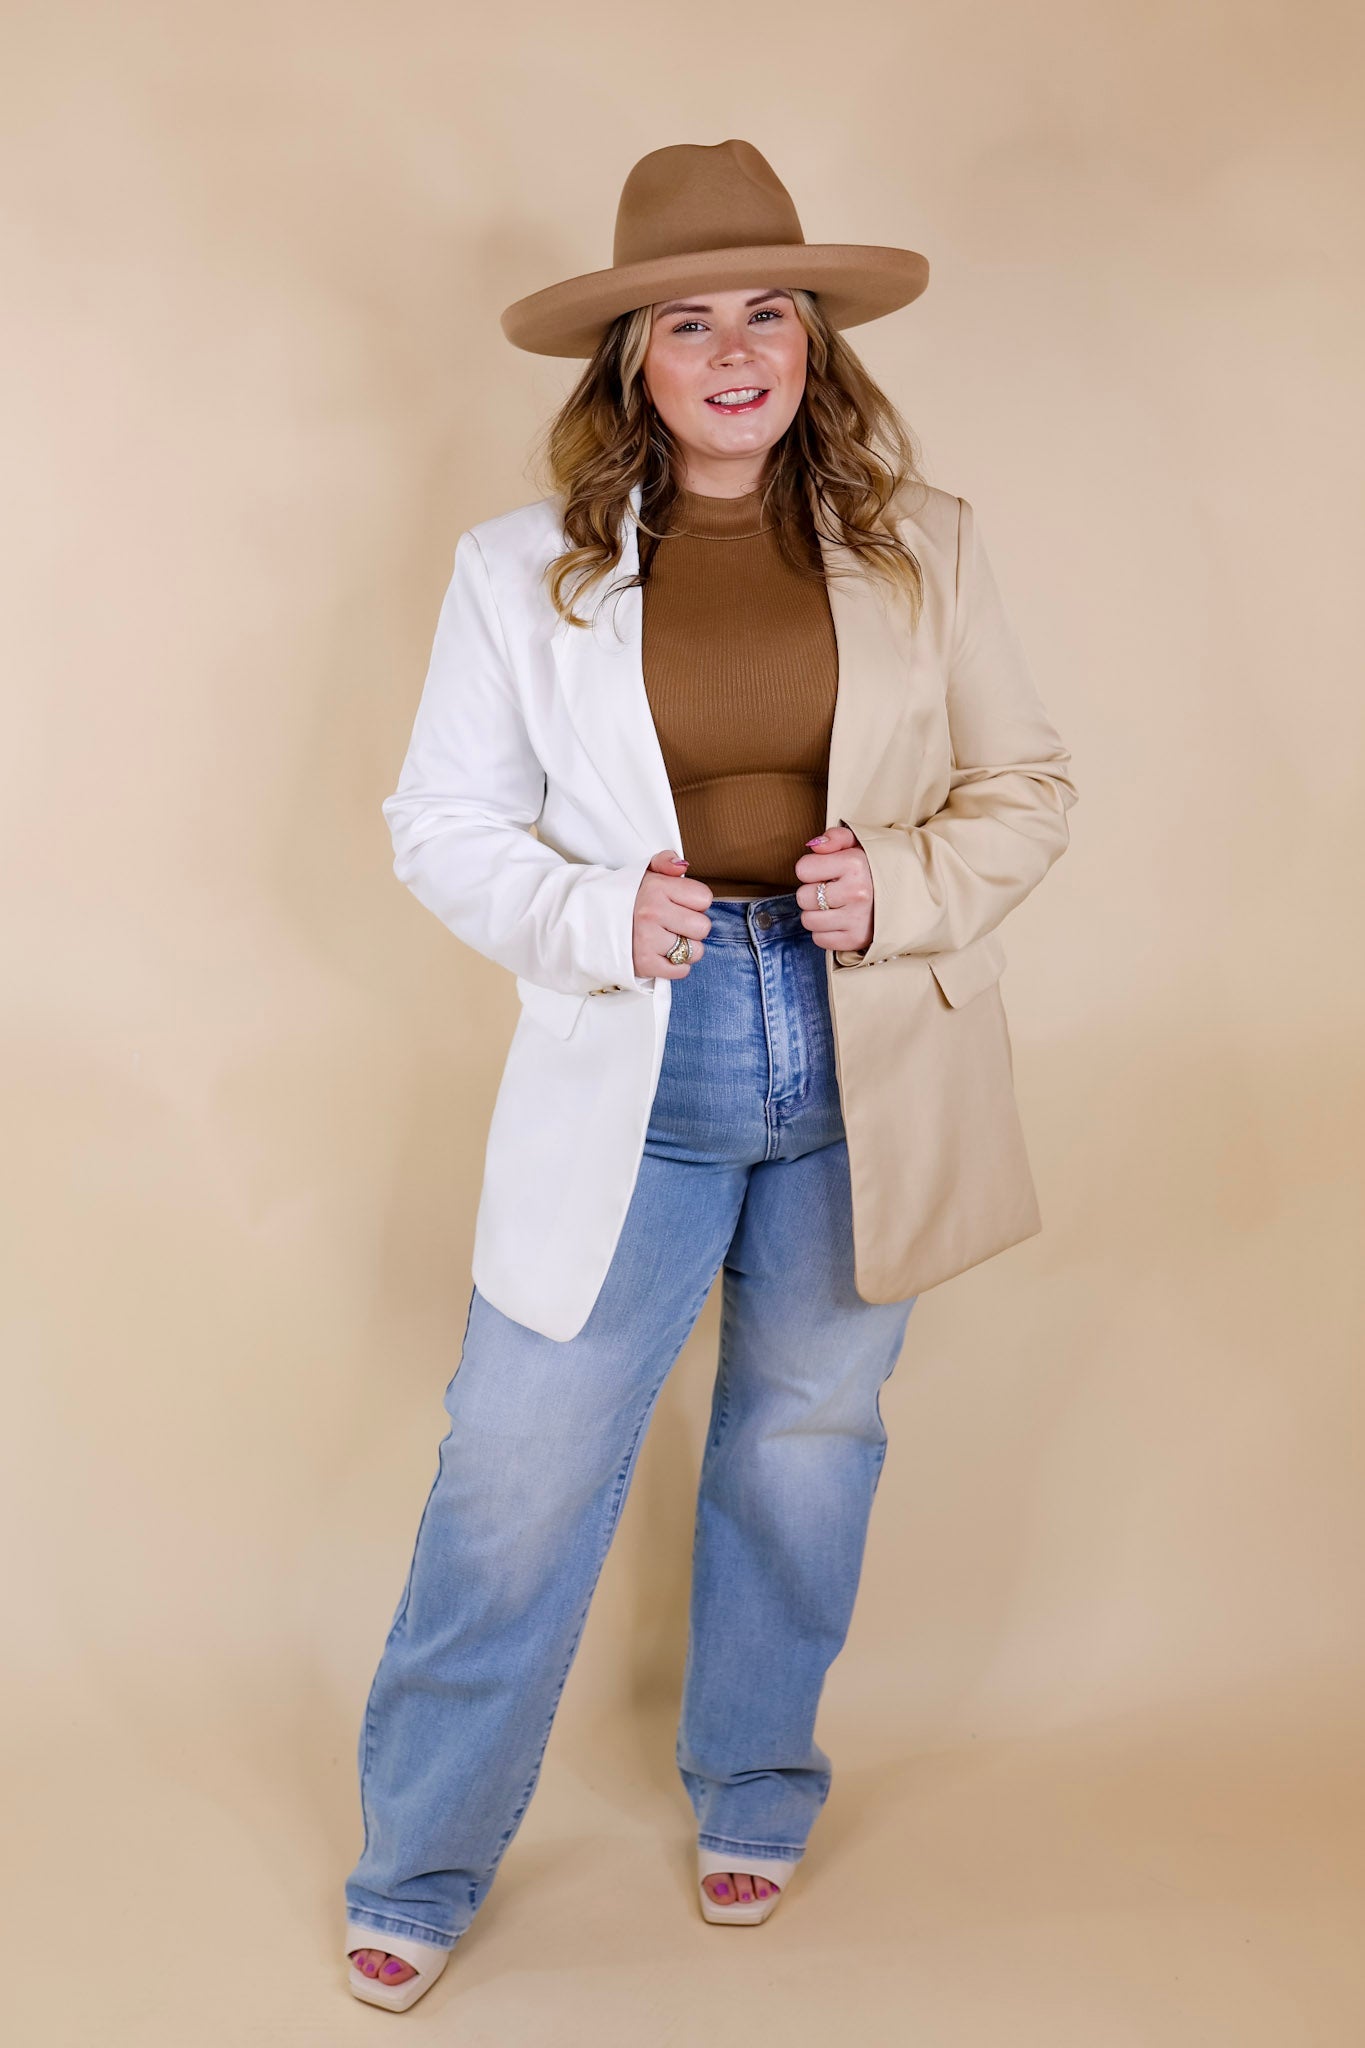 Expect First Class Long Sleeve Color Block Blazer in Beige and White - Giddy Up Glamour Boutique